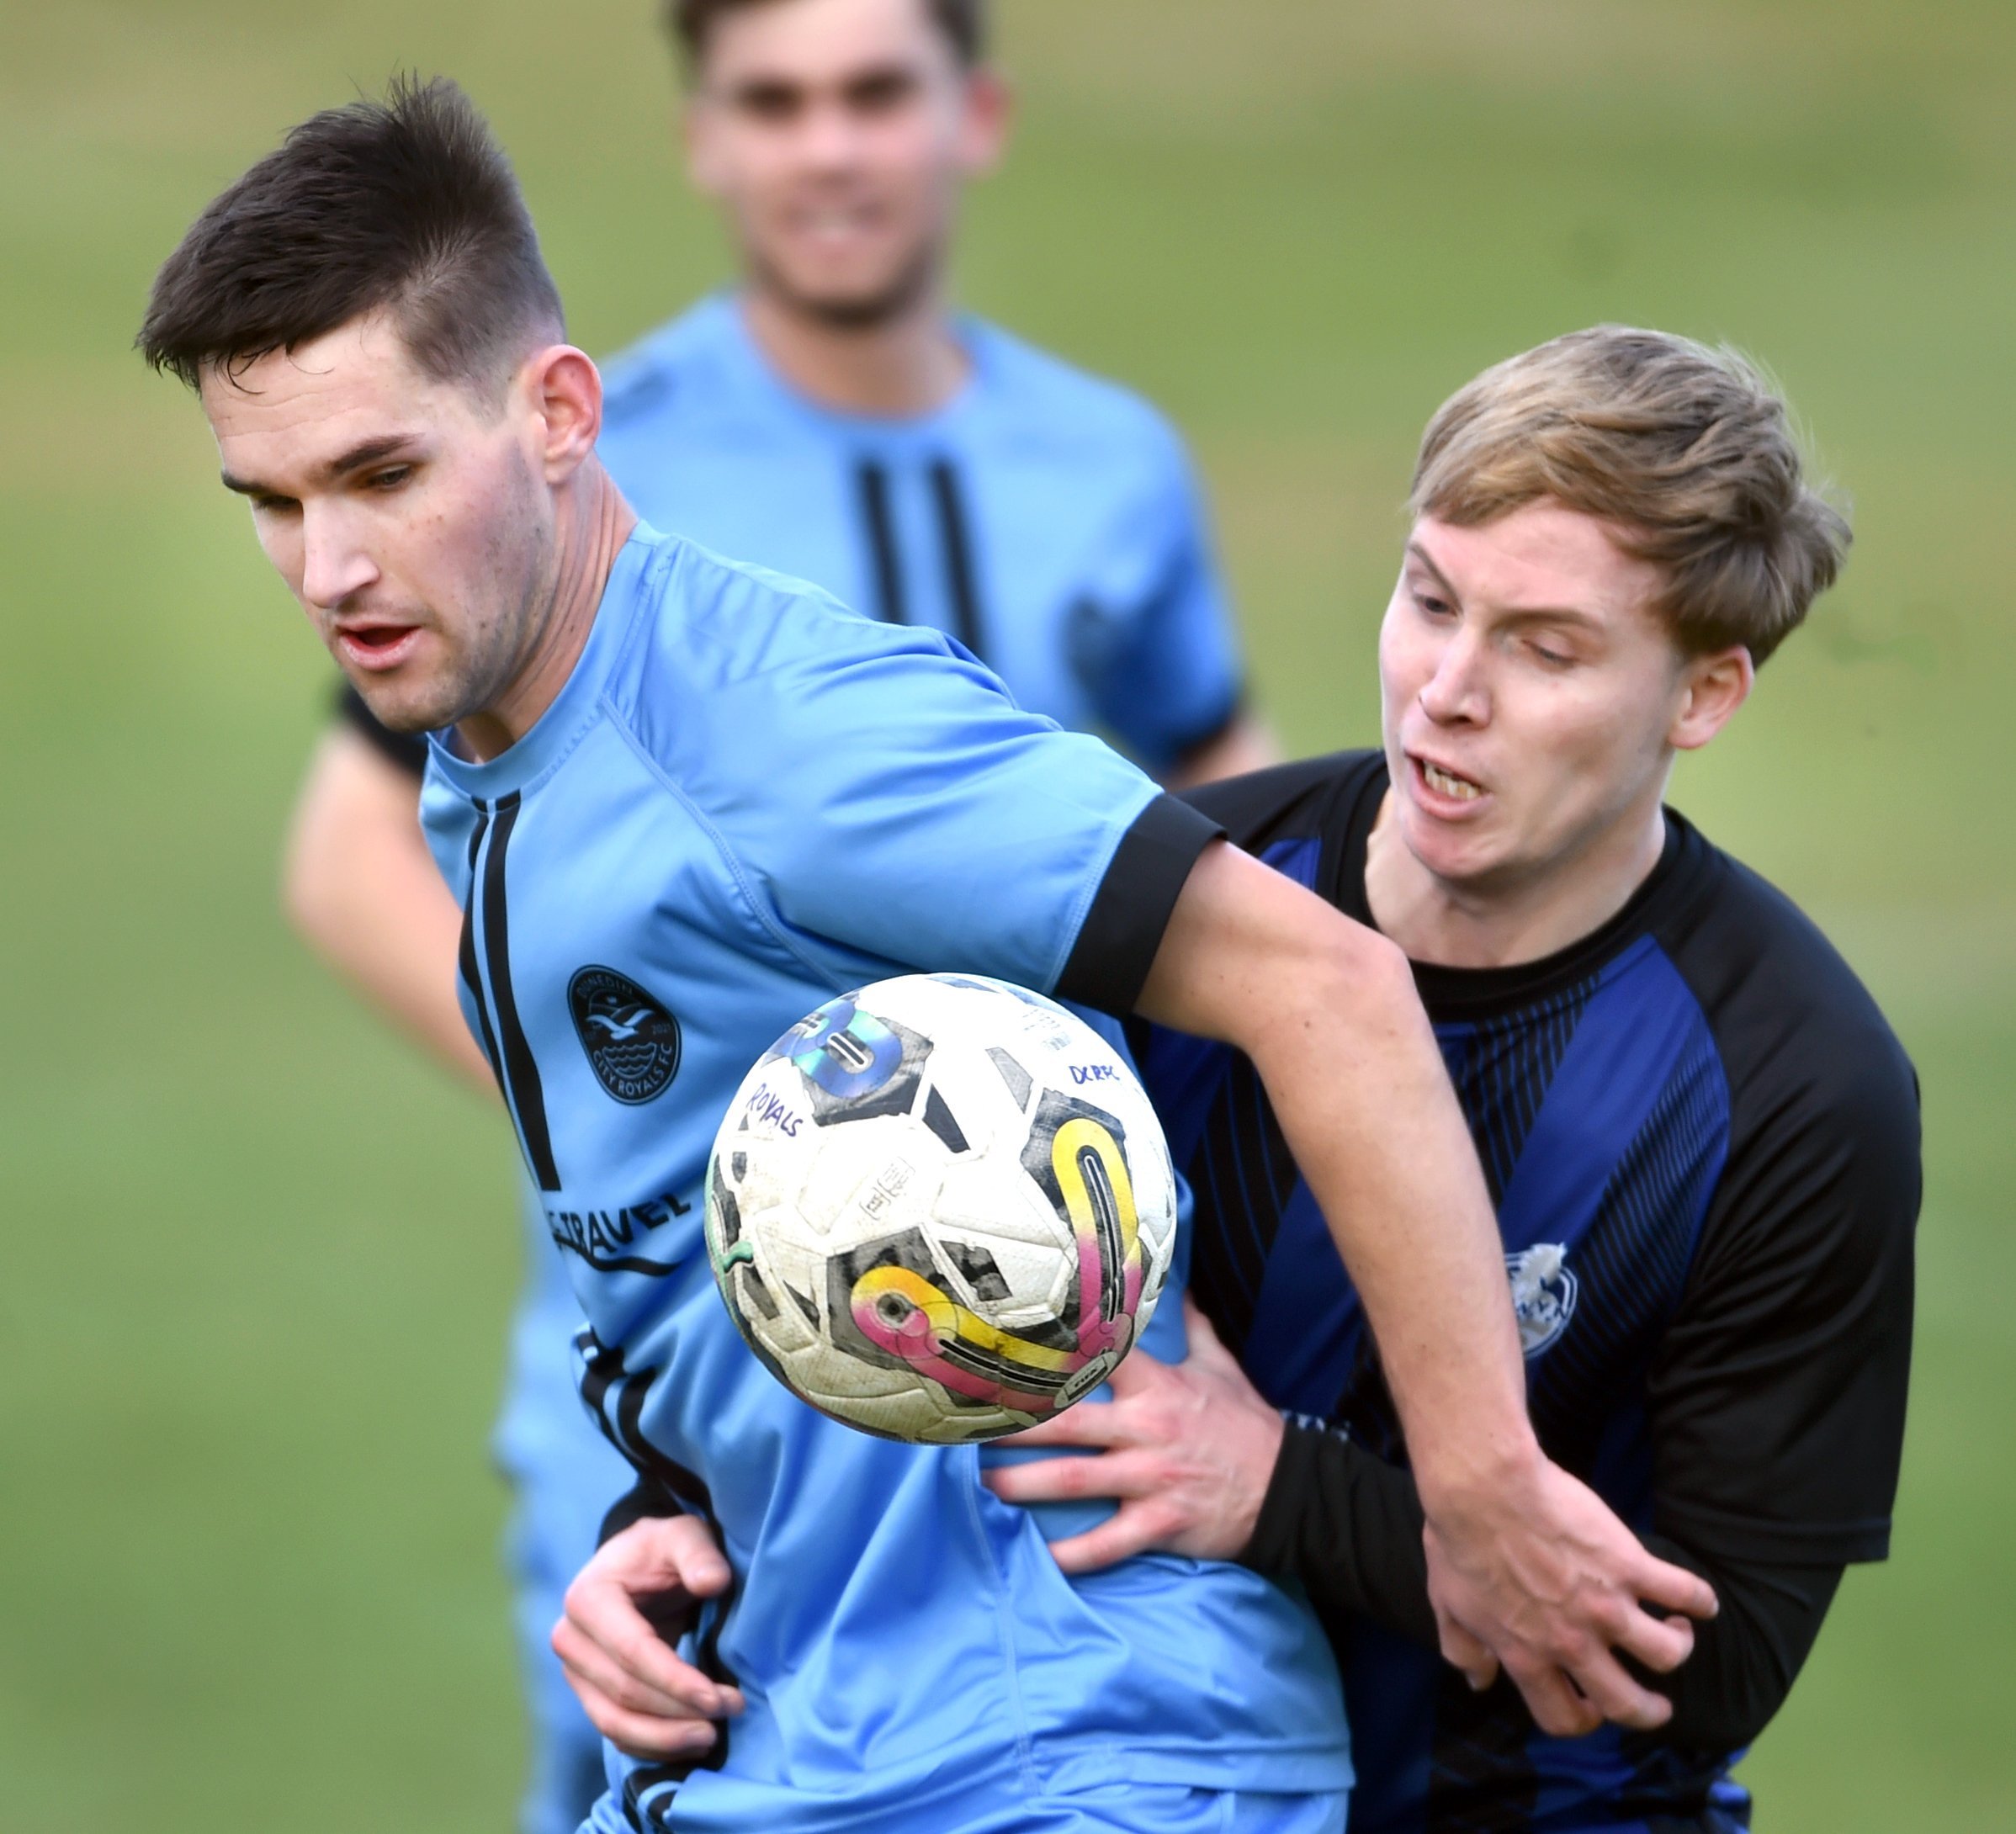 Dunedin City Royals player Raven August (left) contests for the ball against Selwyn United’s Luke...